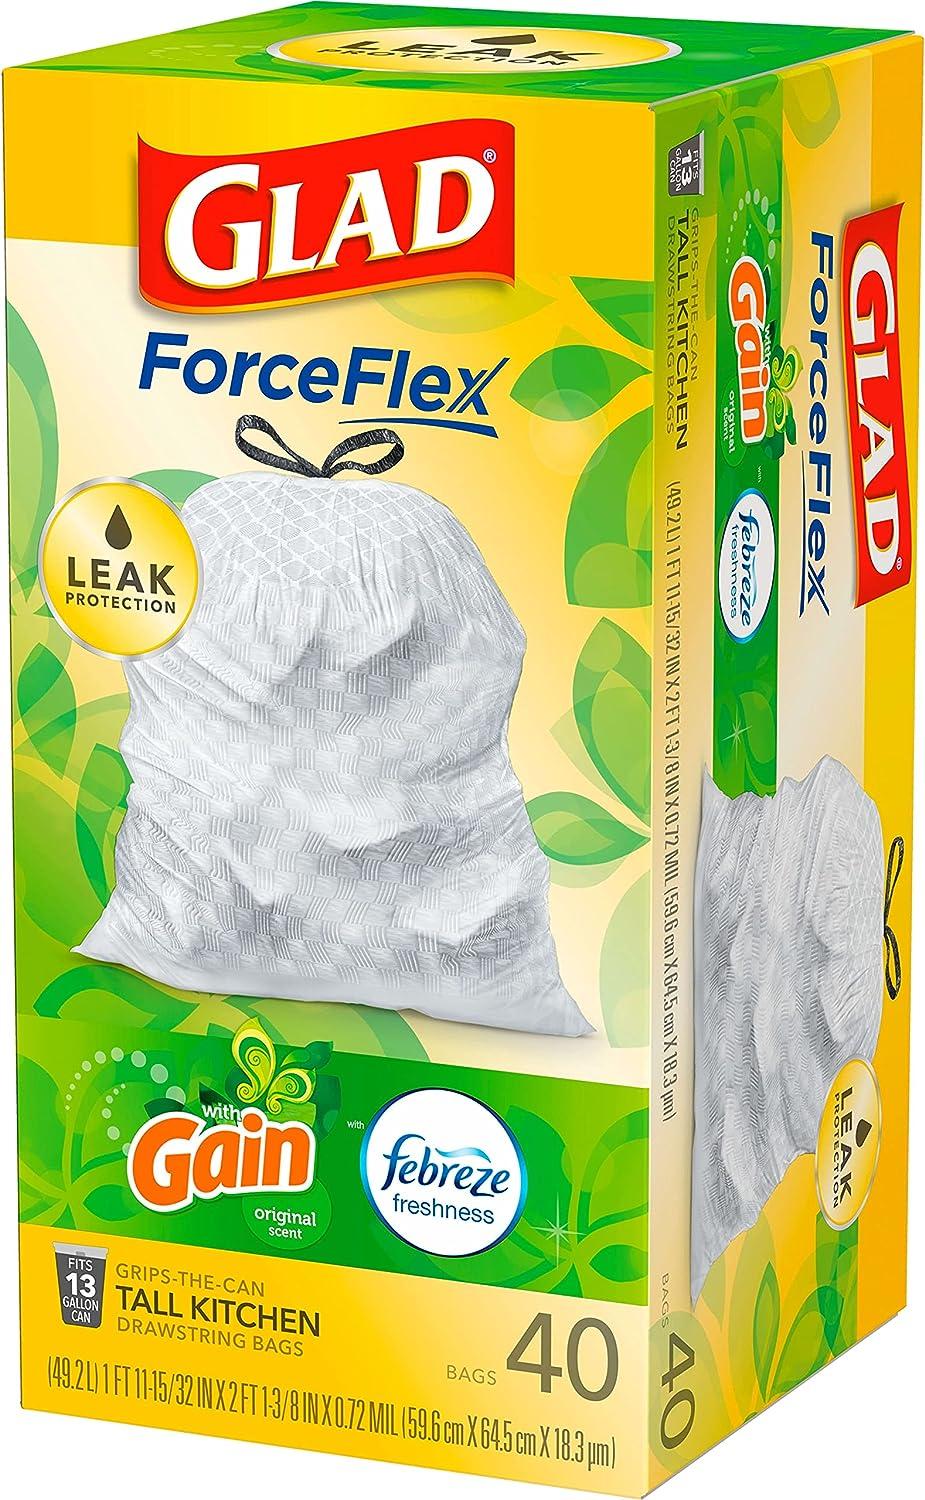 ForceFlex 13 gal. Tall Kitchen Drawstring Gain Original with Febreze Freshness Trash Bags (40-Count, 3-Pack)